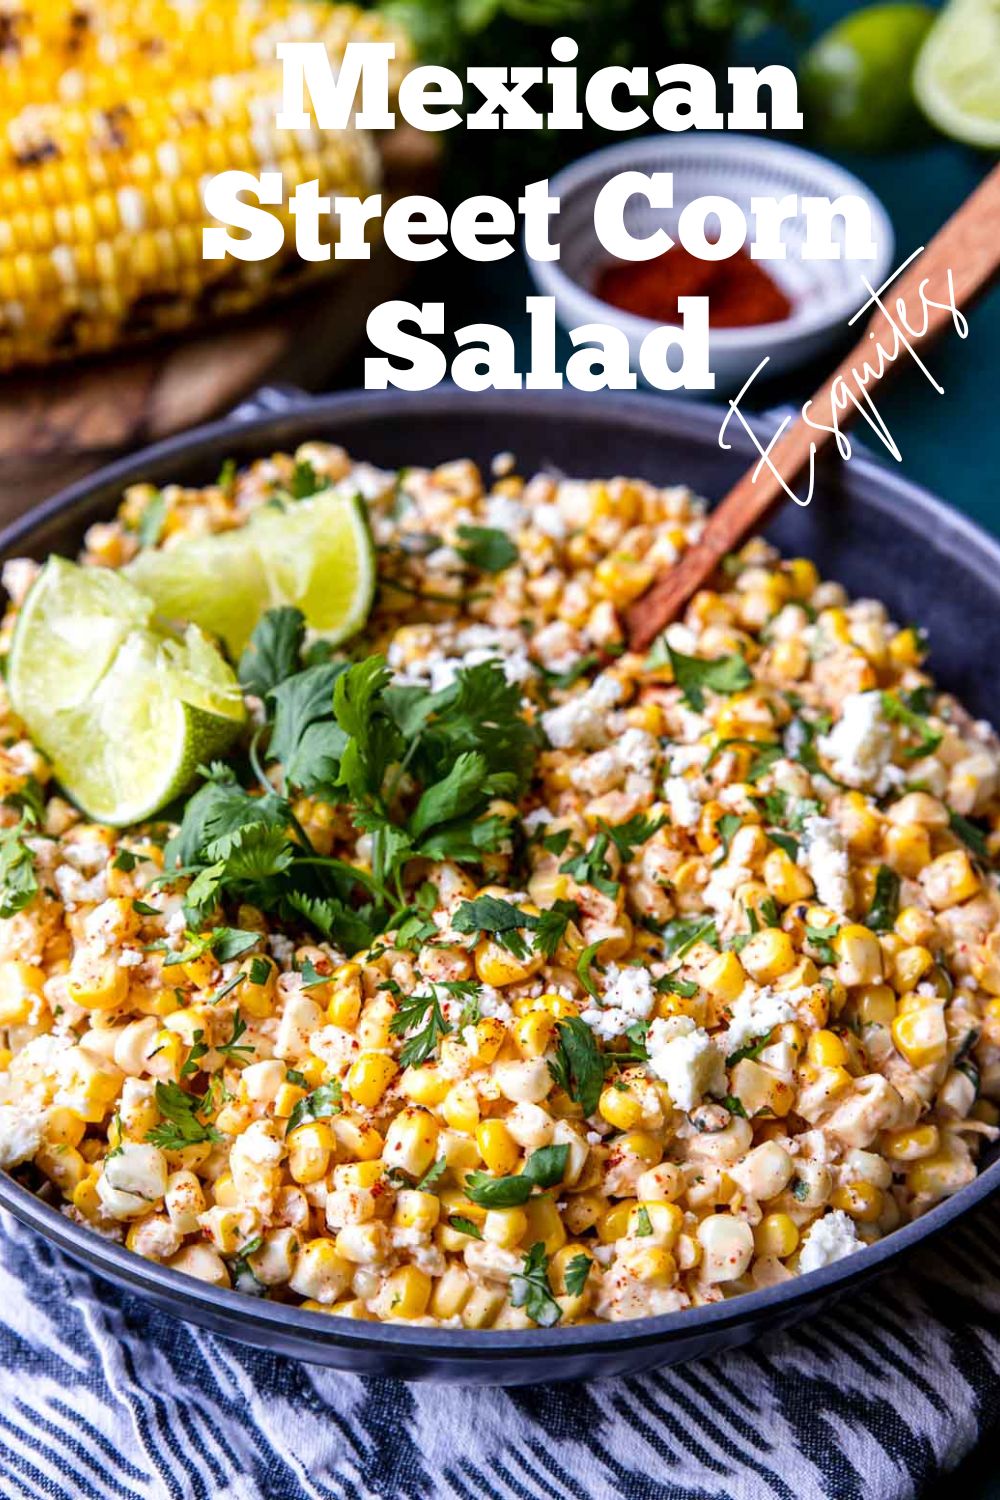 Mexican Street Corn Salad Pinterest Image with text overlay